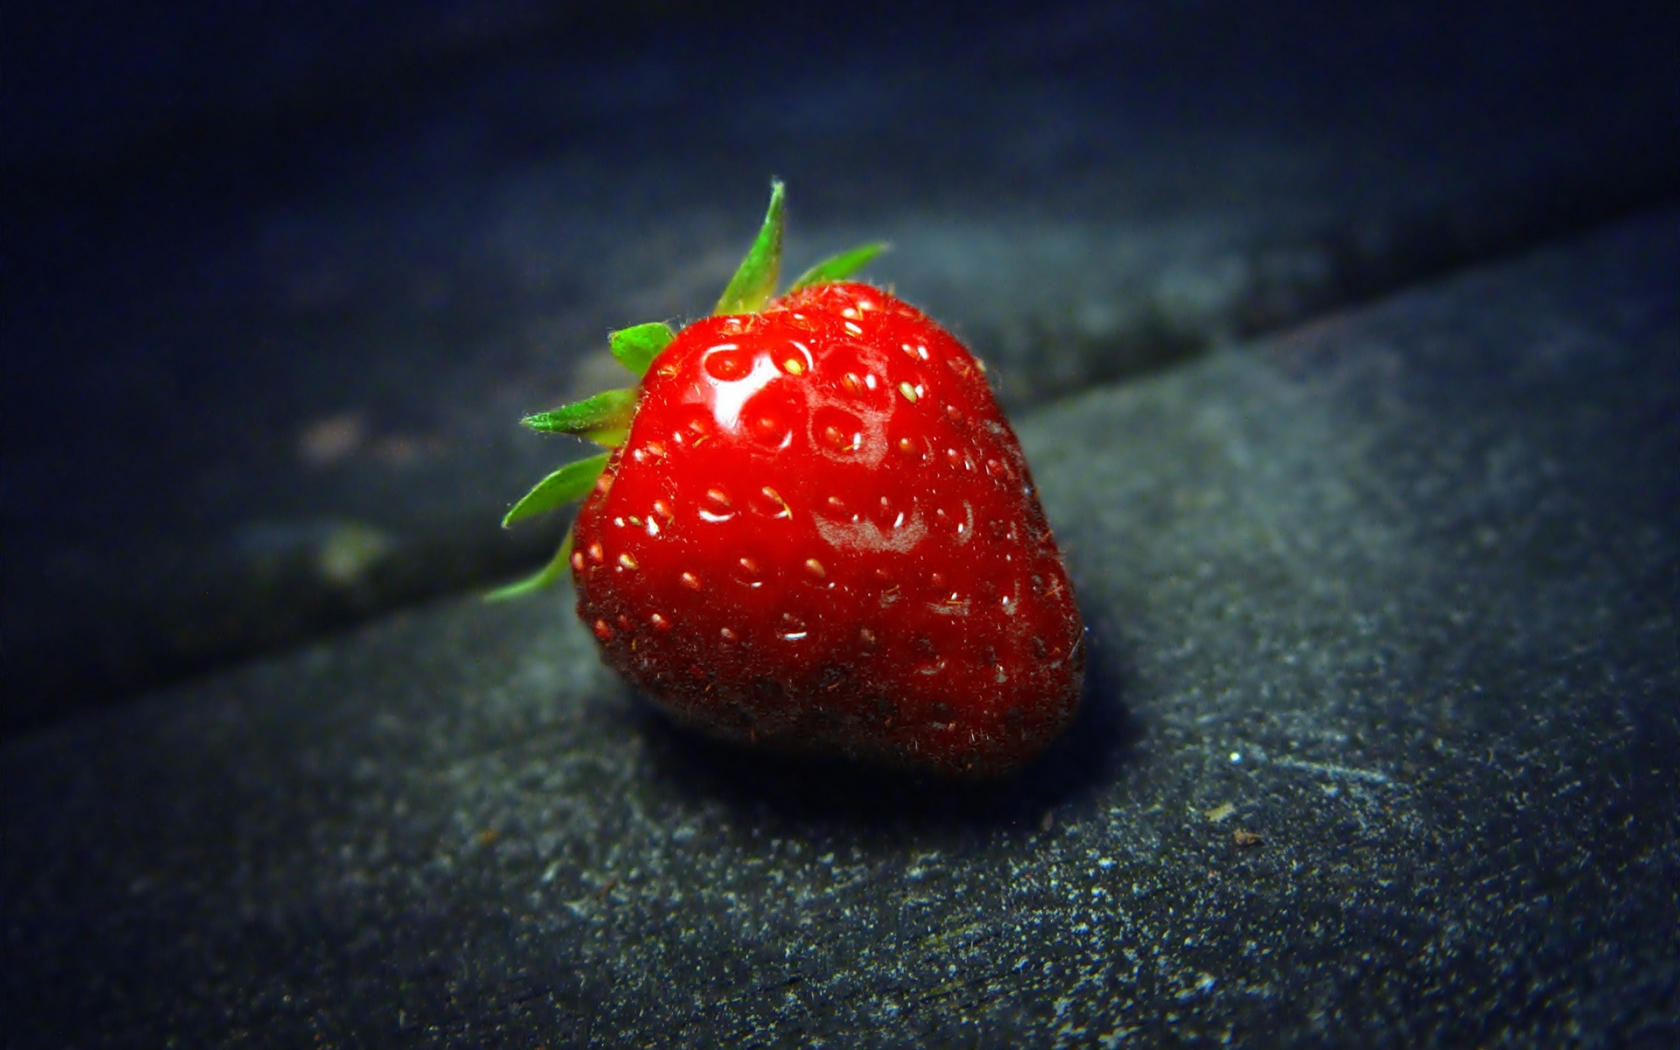 The Strawberry for 1680 x 1050 widescreen resolution